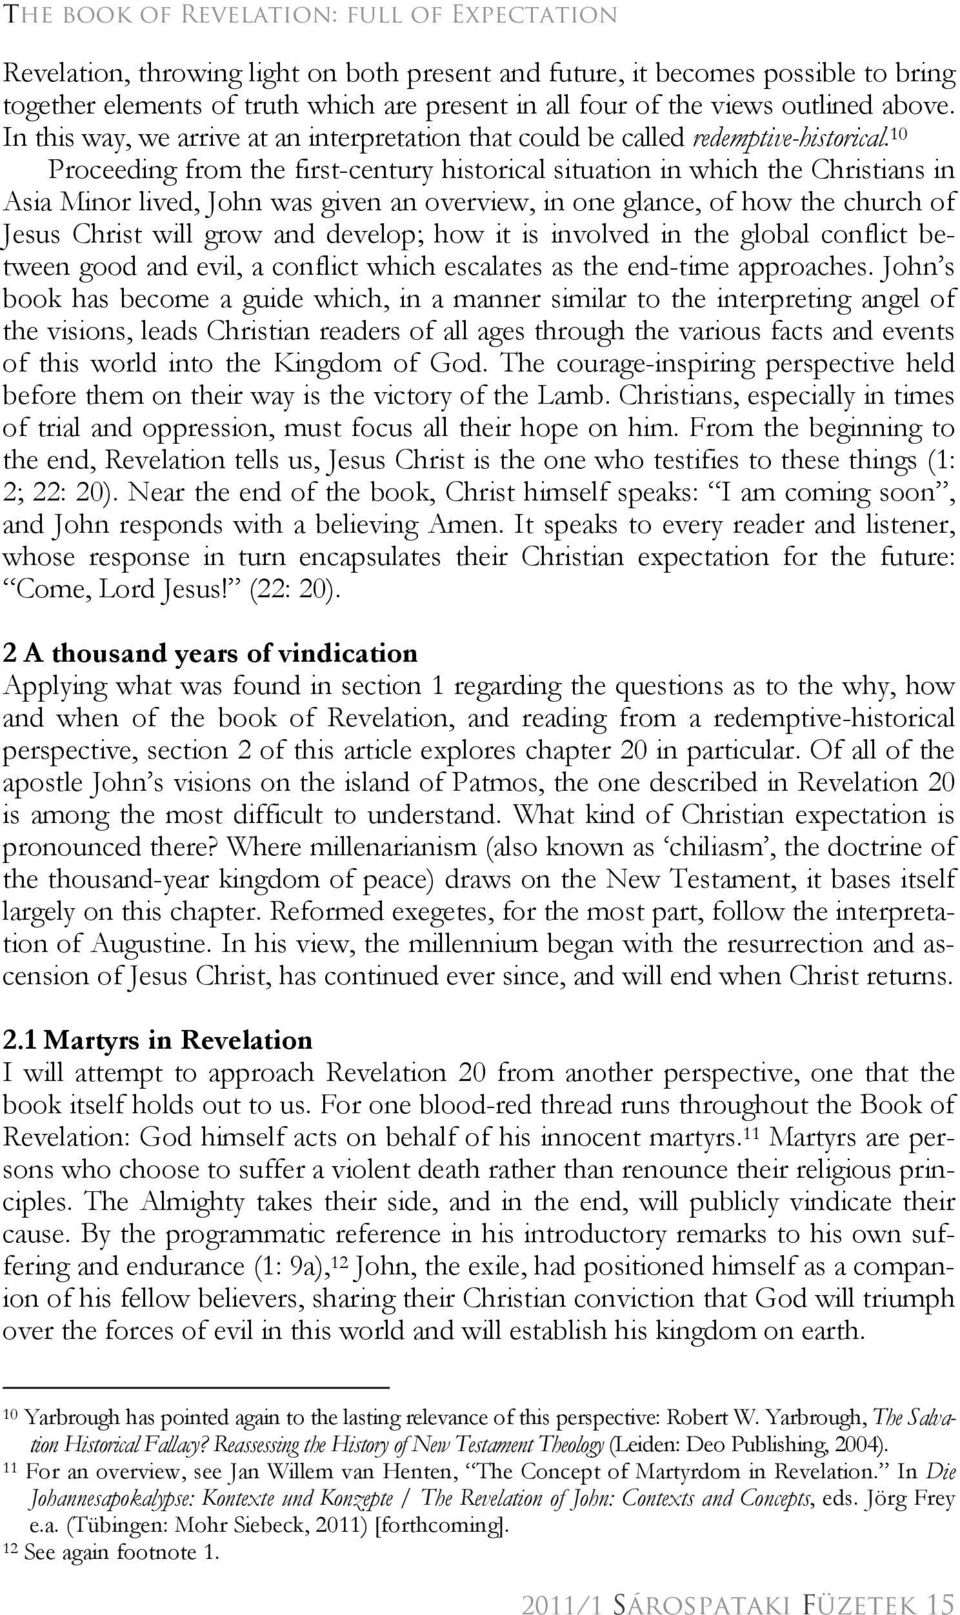 10 Proceeding from the first-century historical situation in which the Christians in Asia Minor lived, John was given an overview, in one glance, of how the church of Jesus Christ will grow and